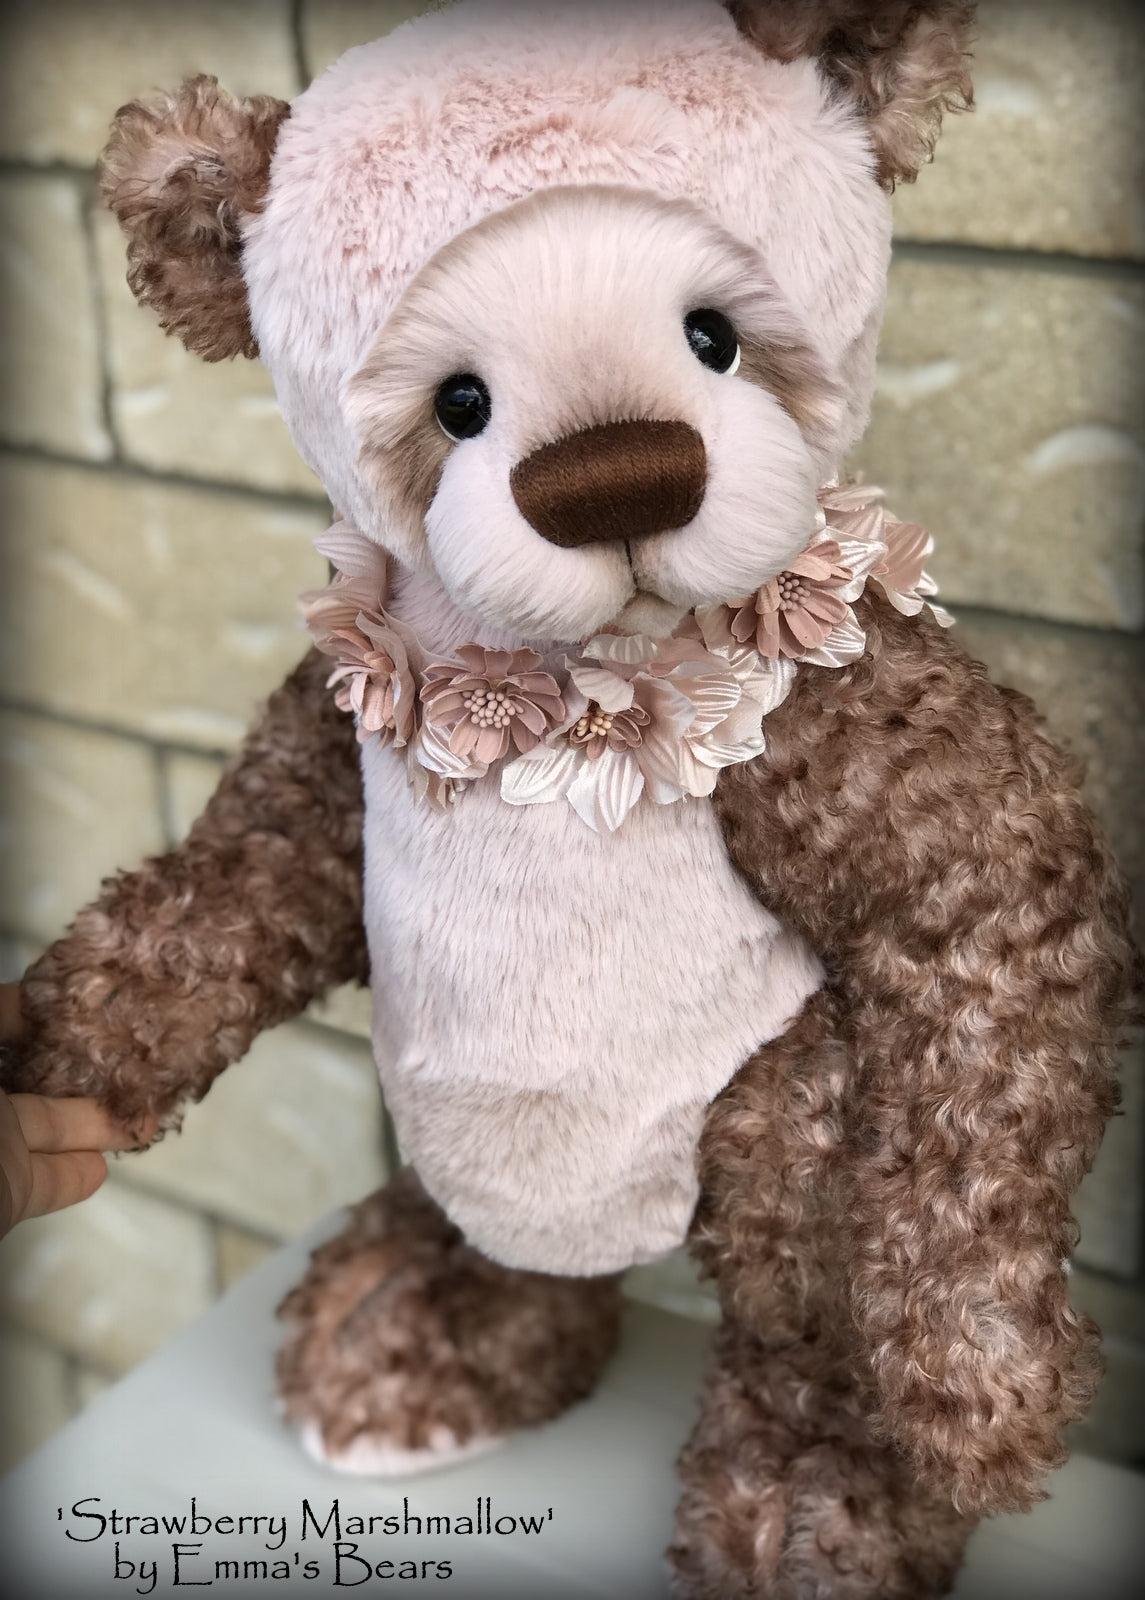 Strawberry Marshmallow - 19" Kid mohair and faux fur bear by Emma's Bears - OOAK